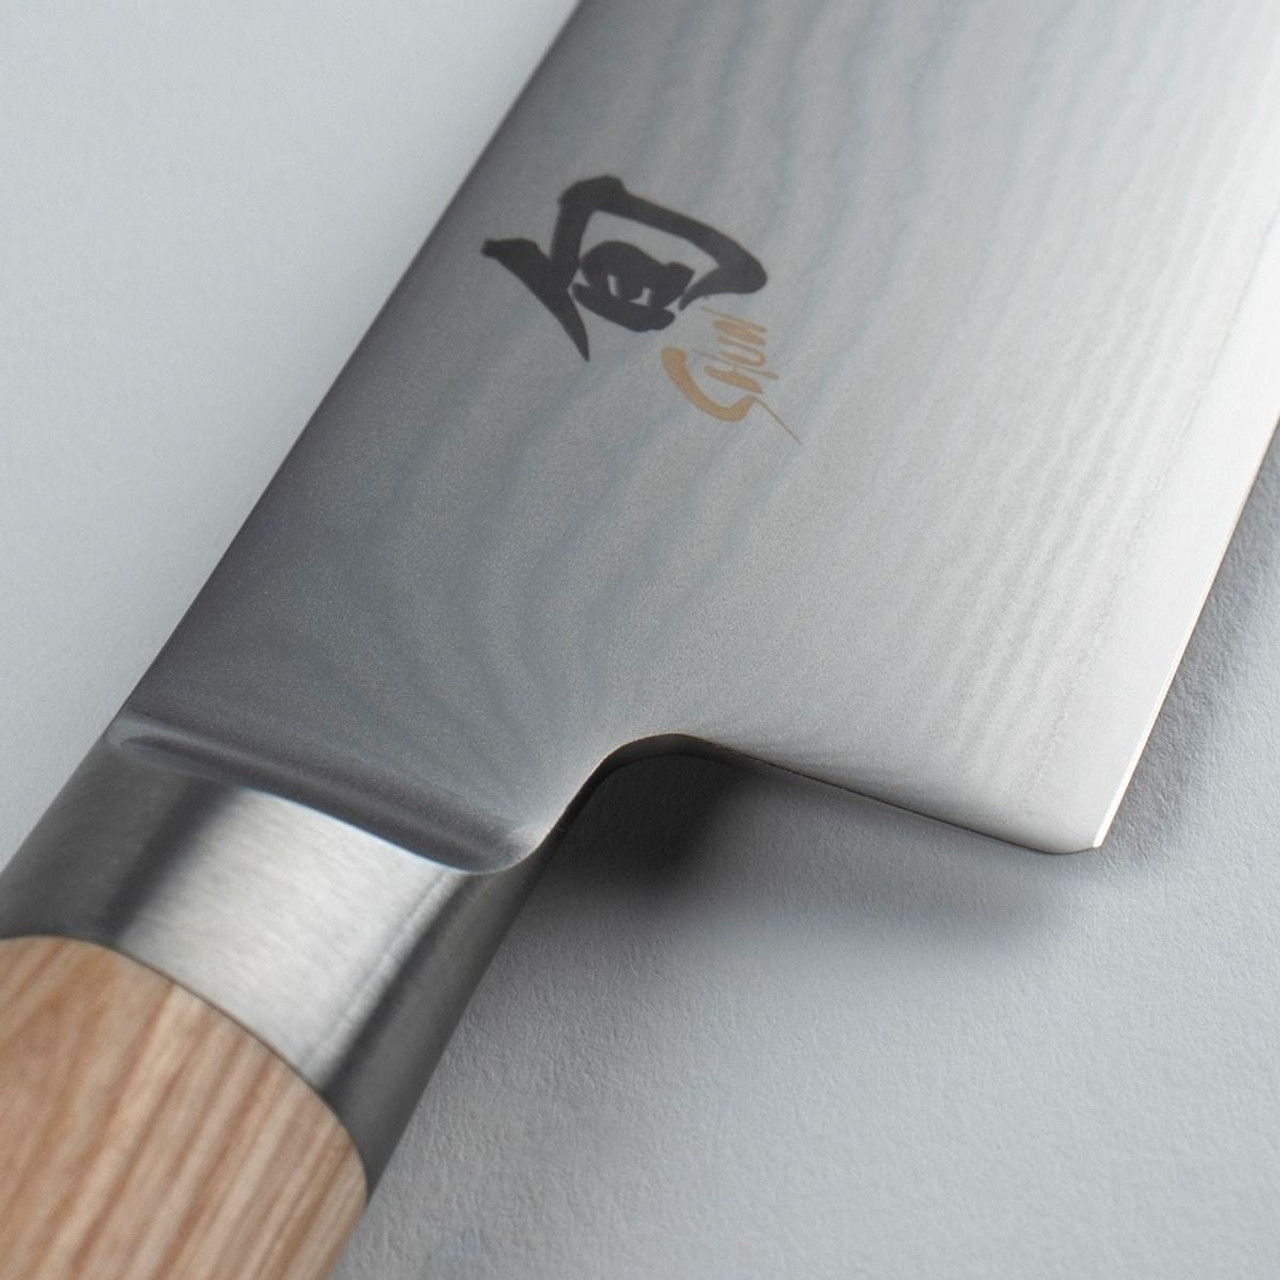 https://cdn11.bigcommerce.com/s-hccytny0od/images/stencil/1280x1280/products/3335/11953/shun-classic-blonde-chefs-knife-1__49055.1590324720.jpg?c=2?imbypass=on